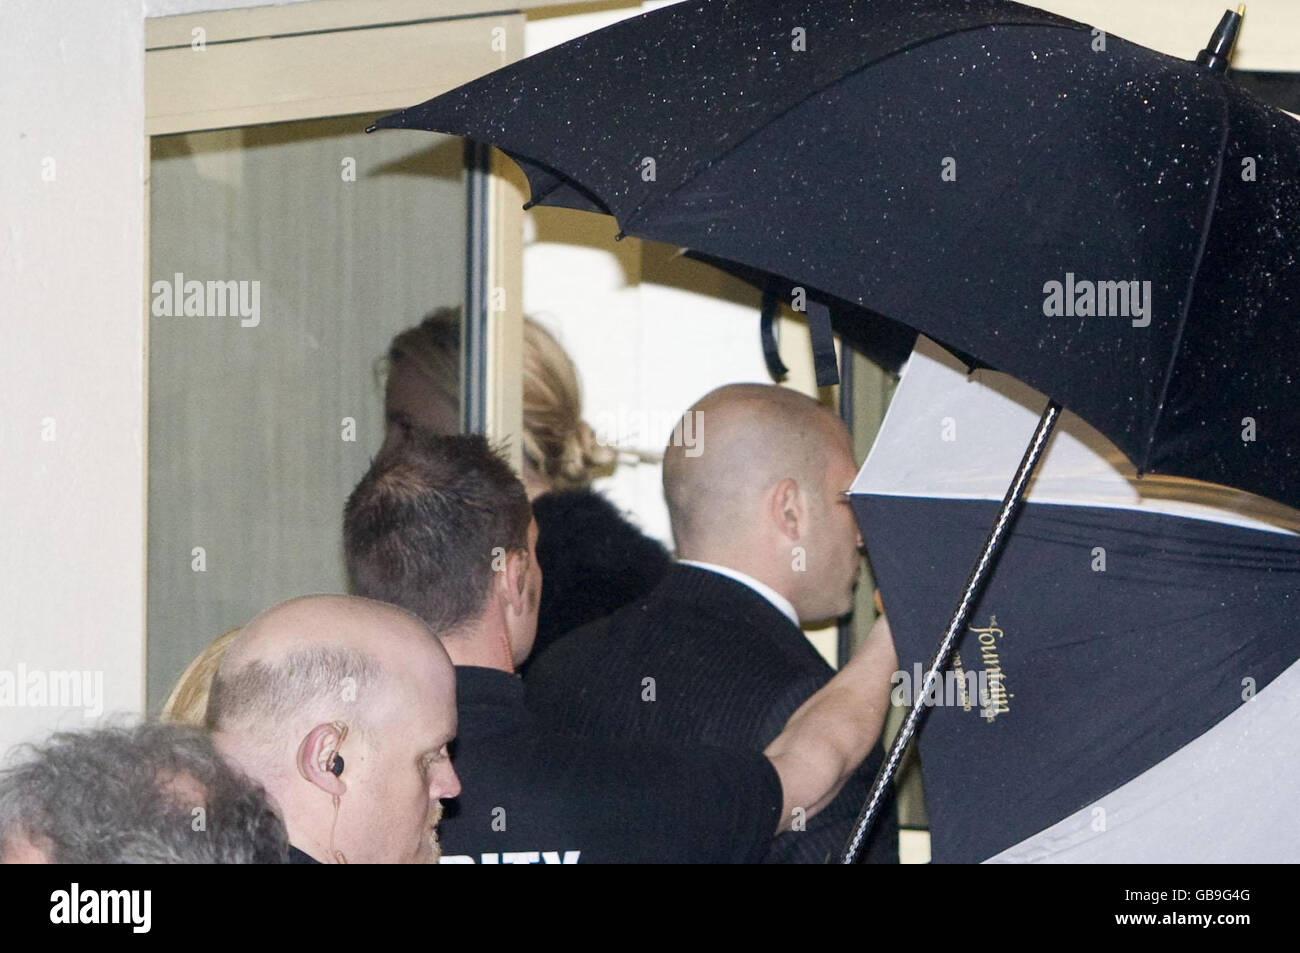 Pop singer Britney Spears arrives at Fountain Studios in Wembley, London, shielded by umbrellas as she arrives for her X Factor performance. Stock Photo